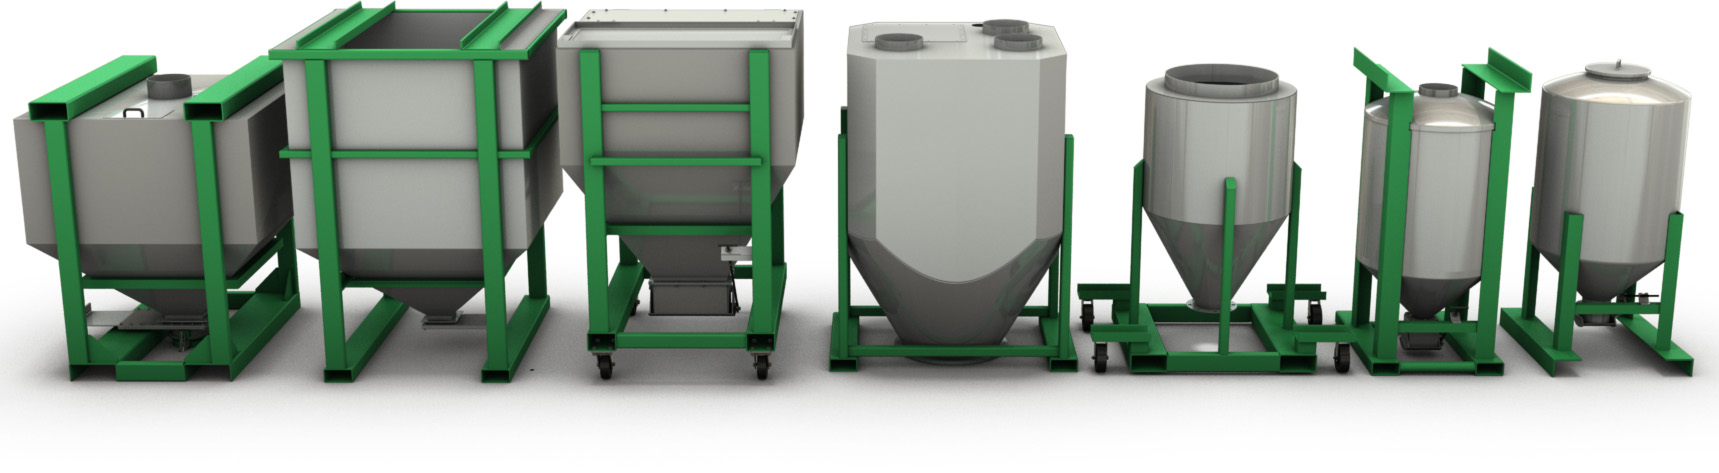 Portable Bin and Tote Lineup